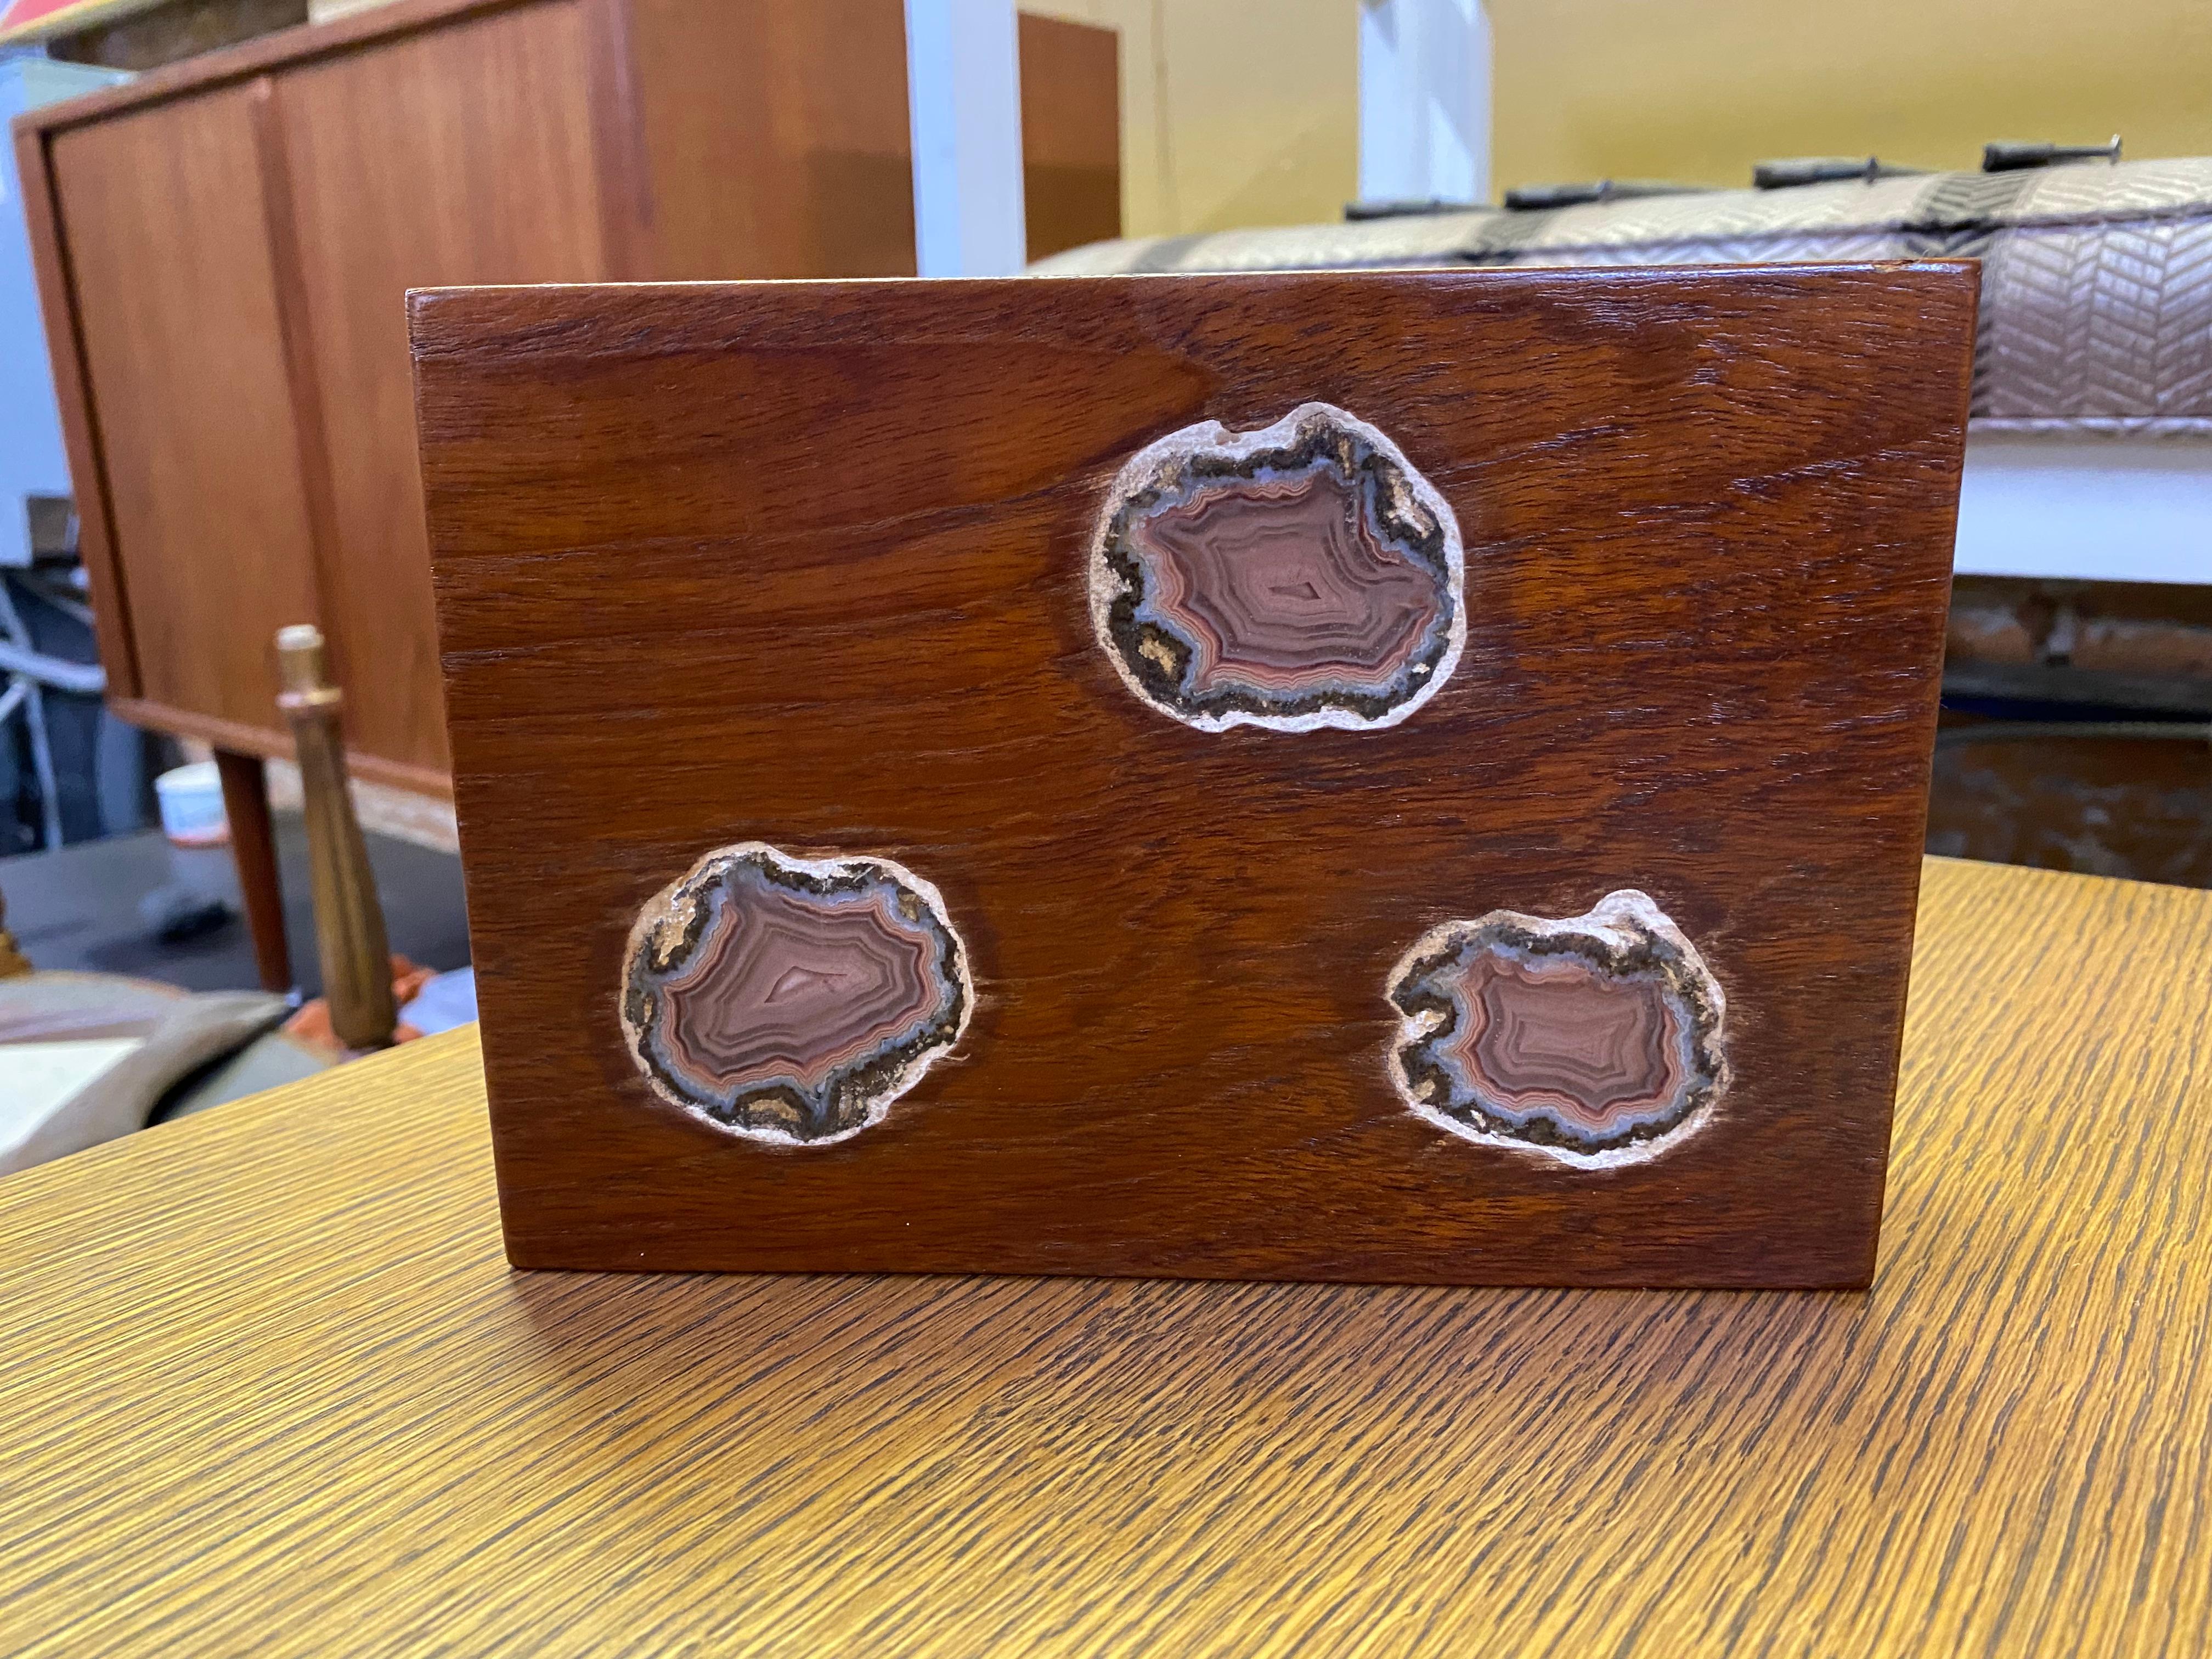 A superb bench made teak and agate geode inlaid nigh light. A teak light box that contains three very small watt bulbs that light up behind the geode inlay. Circa 1968-70.

Approximate measurements are 2.5